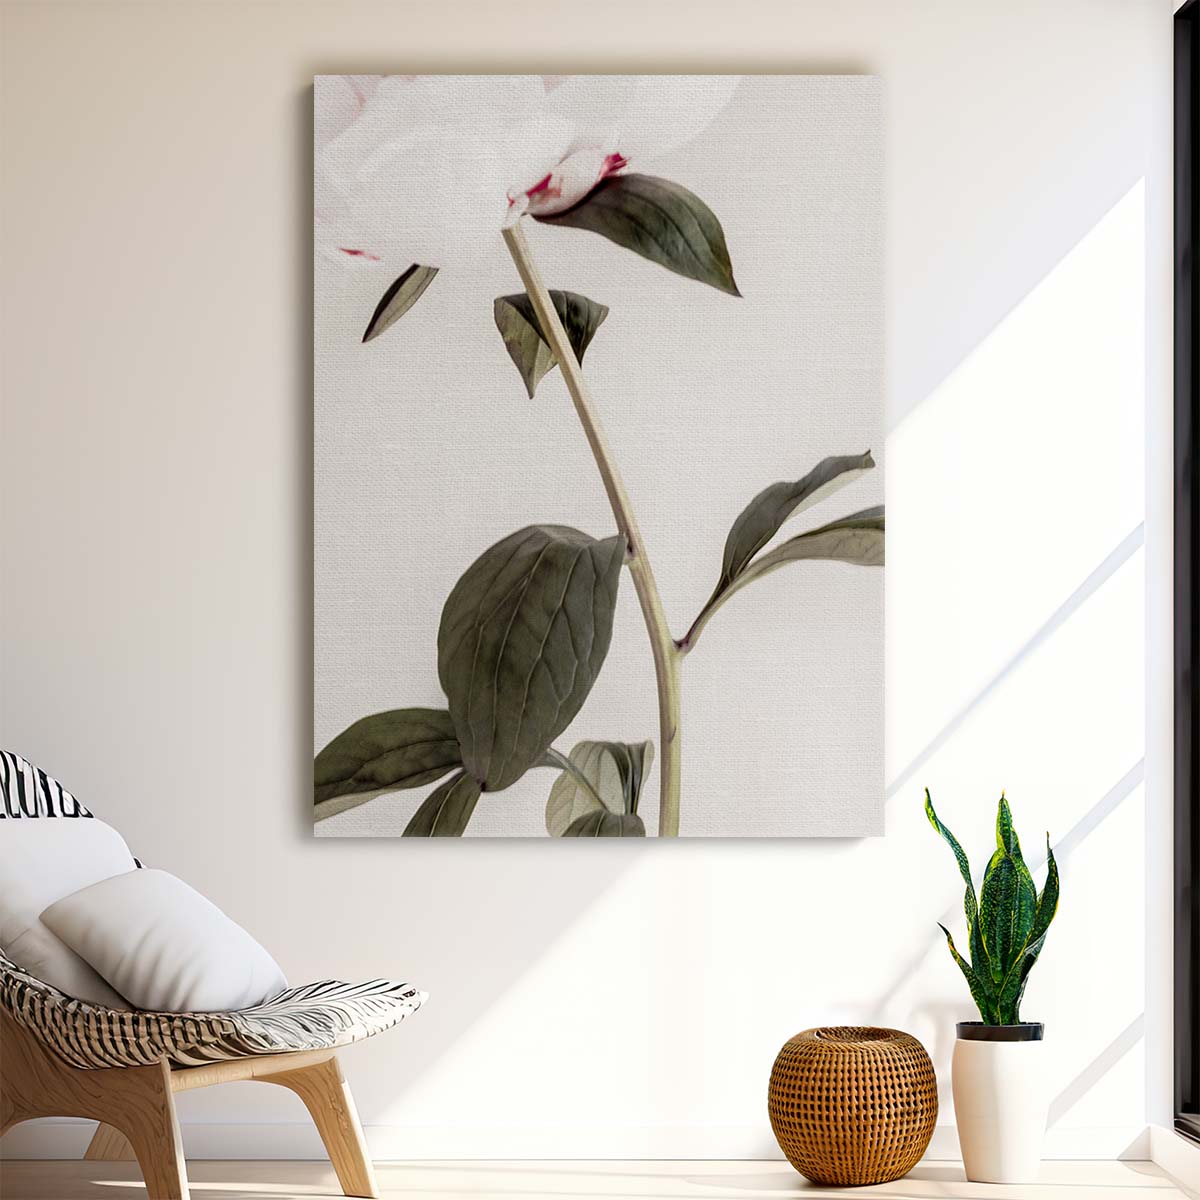 Peony Blossom Photography Botanical Still Life with Green Leaves by Luxuriance Designs, made in USA